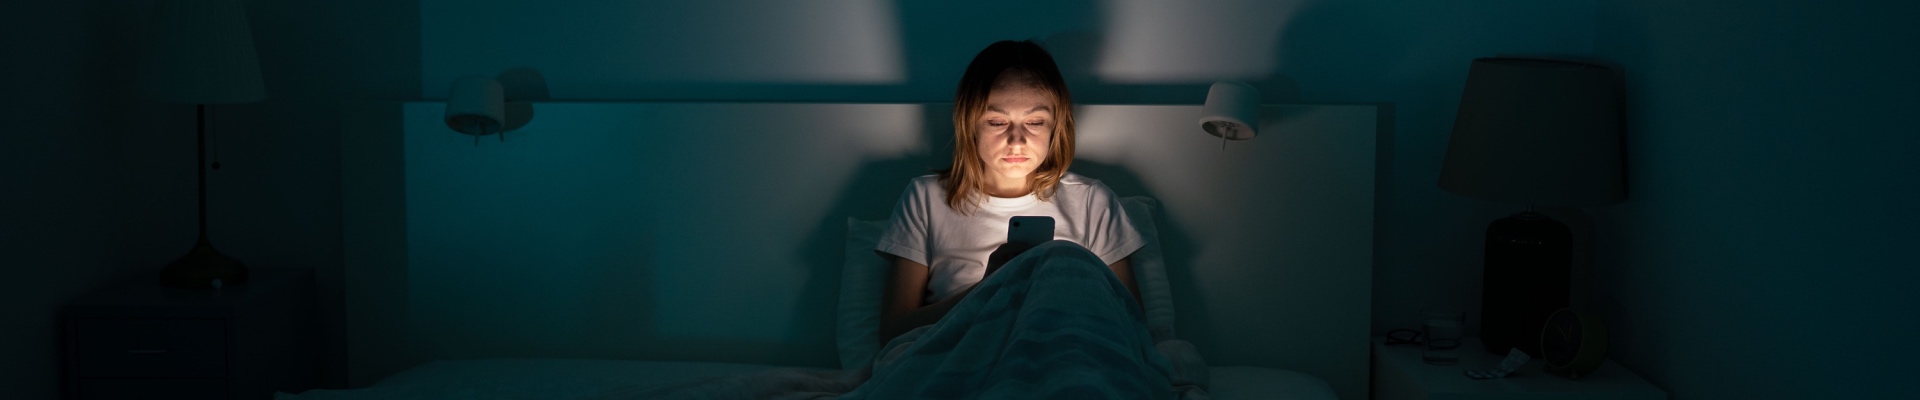 Sleepy exhausted woman lying in bed using smartphone, can not sleep. Insomnia, addiction concept. Sad girl bored in bed scrolling through social networks on mobile phone late at night in dark bedroom.